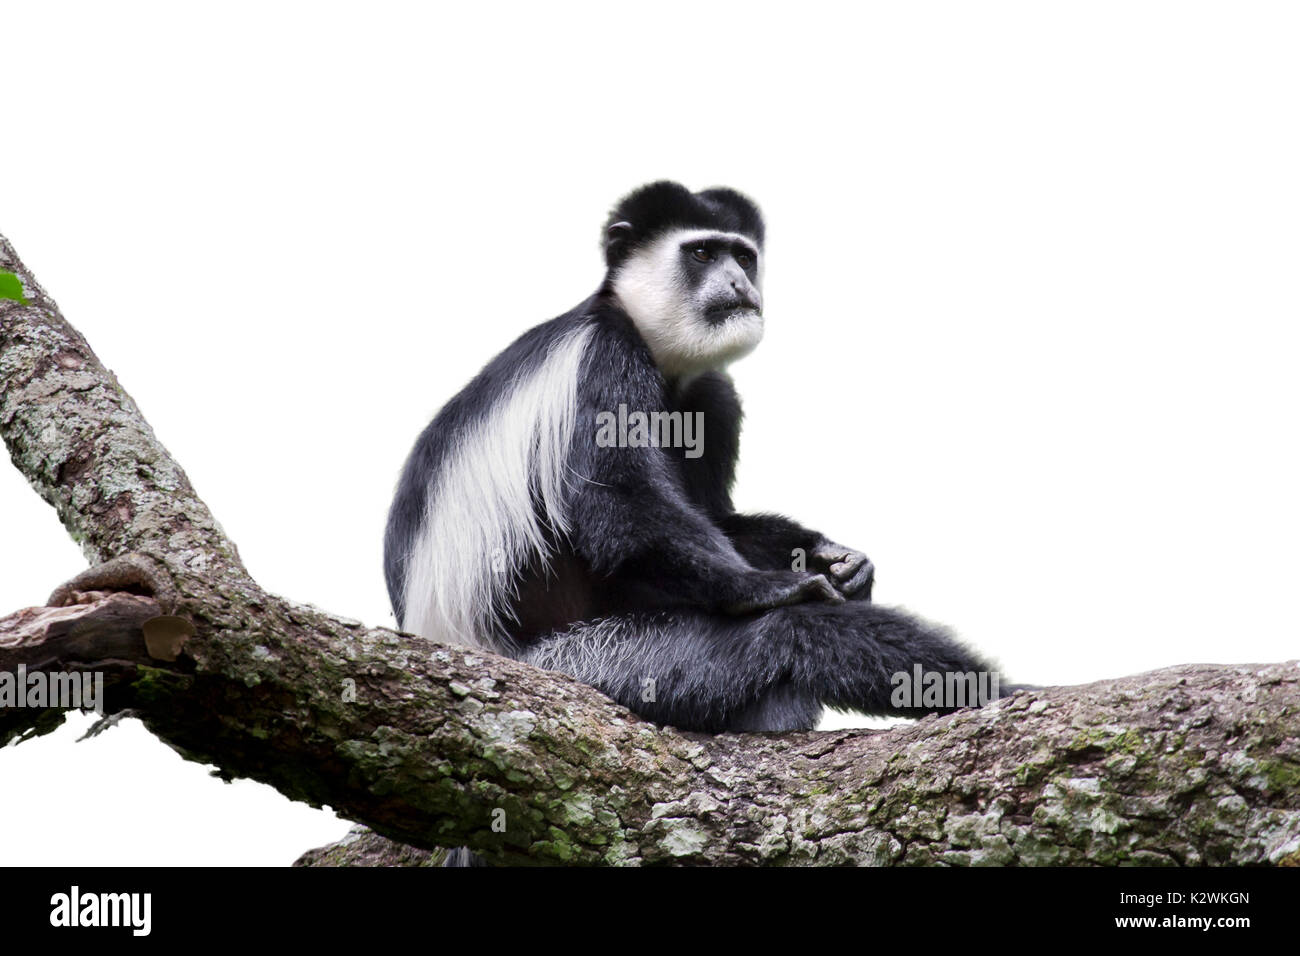 Eastern Black-and-white Colobus (Colobus guereza) on a tree, isolated on white background. Stock Photo